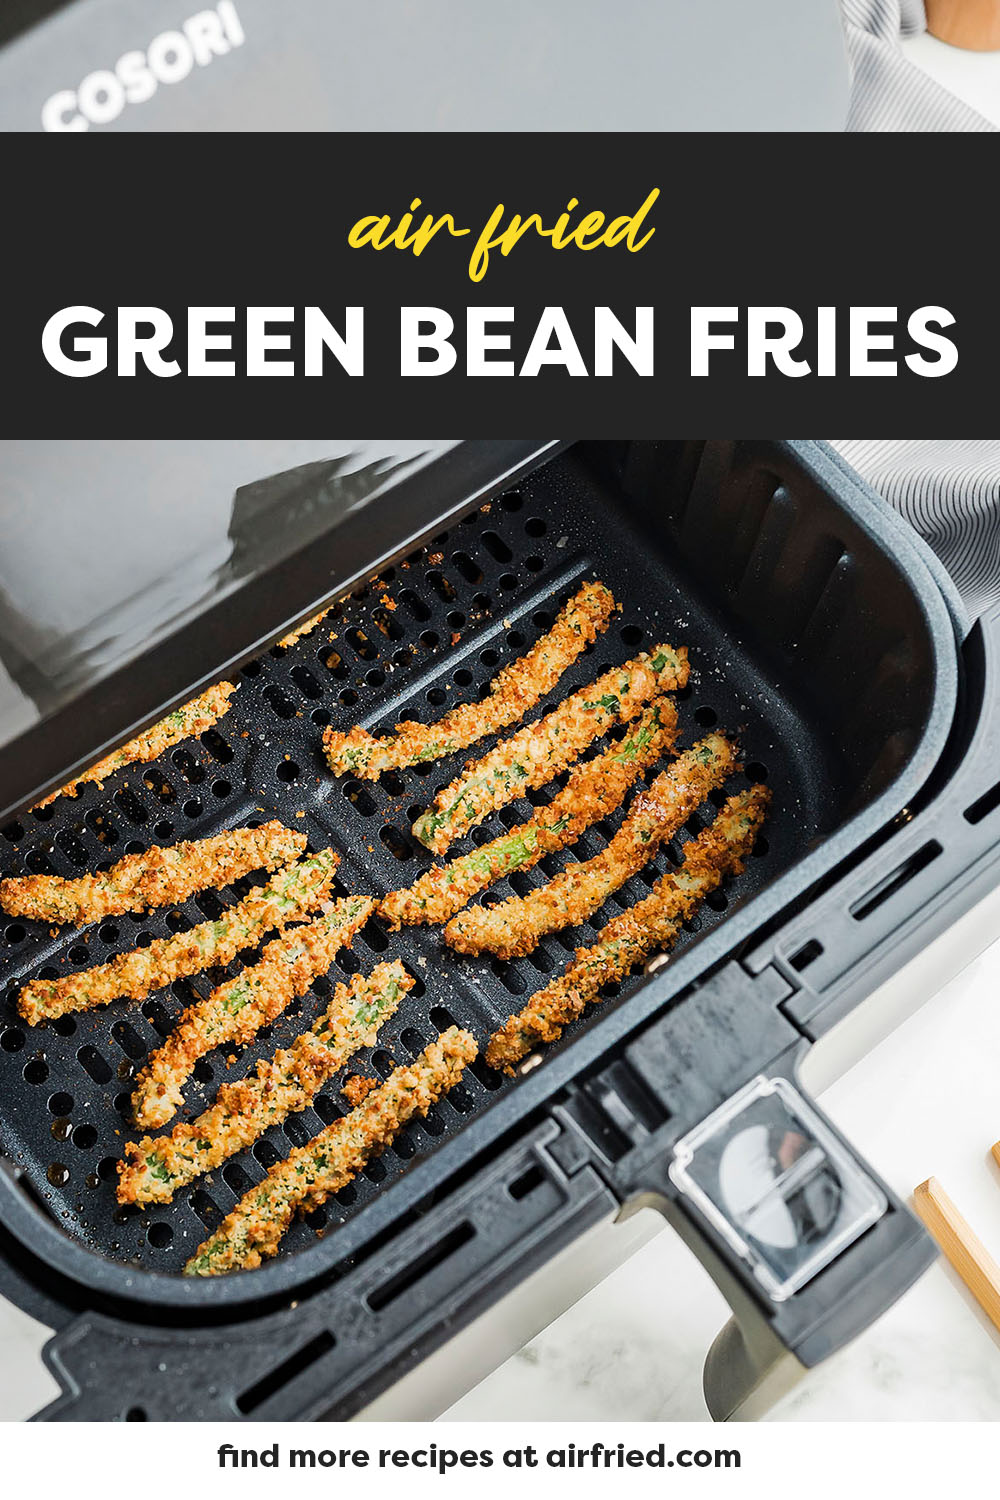 Crispy green bean fries are healthier now that we can make them in the air fryer!